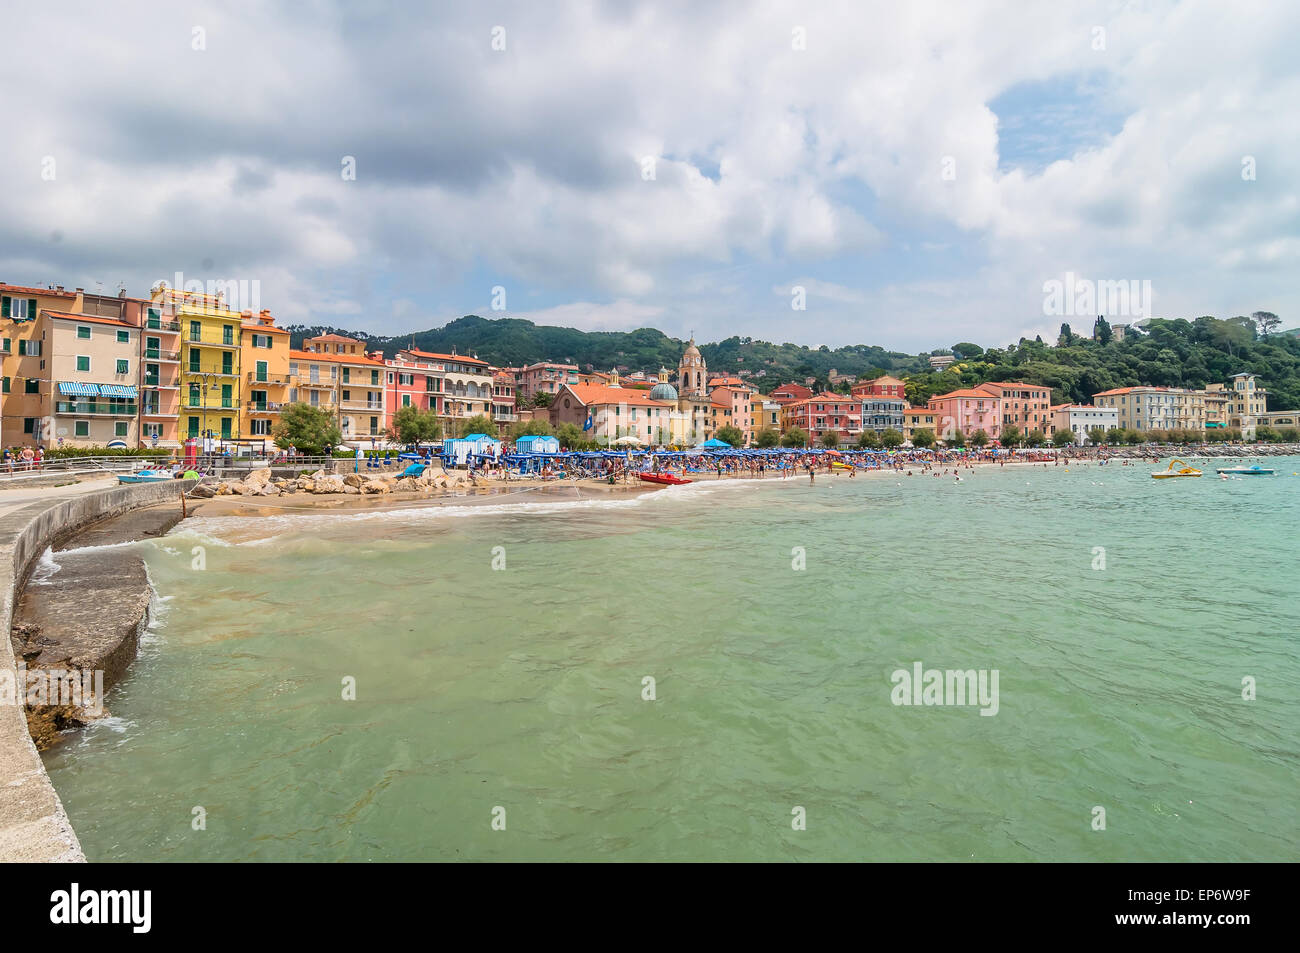 Lerici, Italy - June 29, 2014: locals and tourists enjoy San Terenzo beach and town in Lerici, Italy. Lerici is located in La Sp Stock Photo